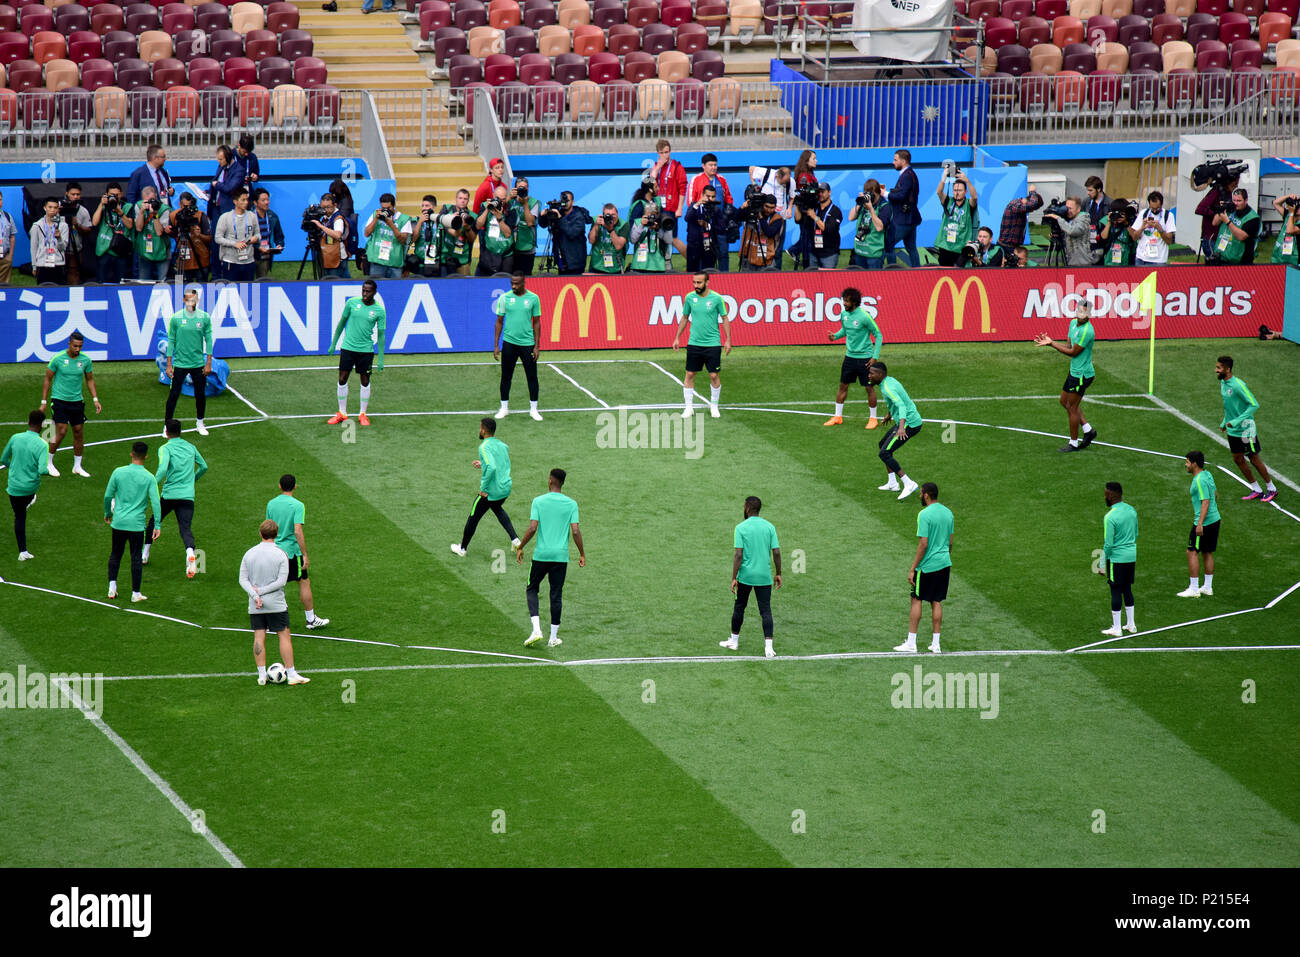 Moscow, Russia - June 13, 2018. National team of Saudi Arabia at workout one day before the opening match of FIFA World Cup 2018 Russia vs Saudi Arabia. Credit: Alizada Studios/Alamy Live News Stock Photo